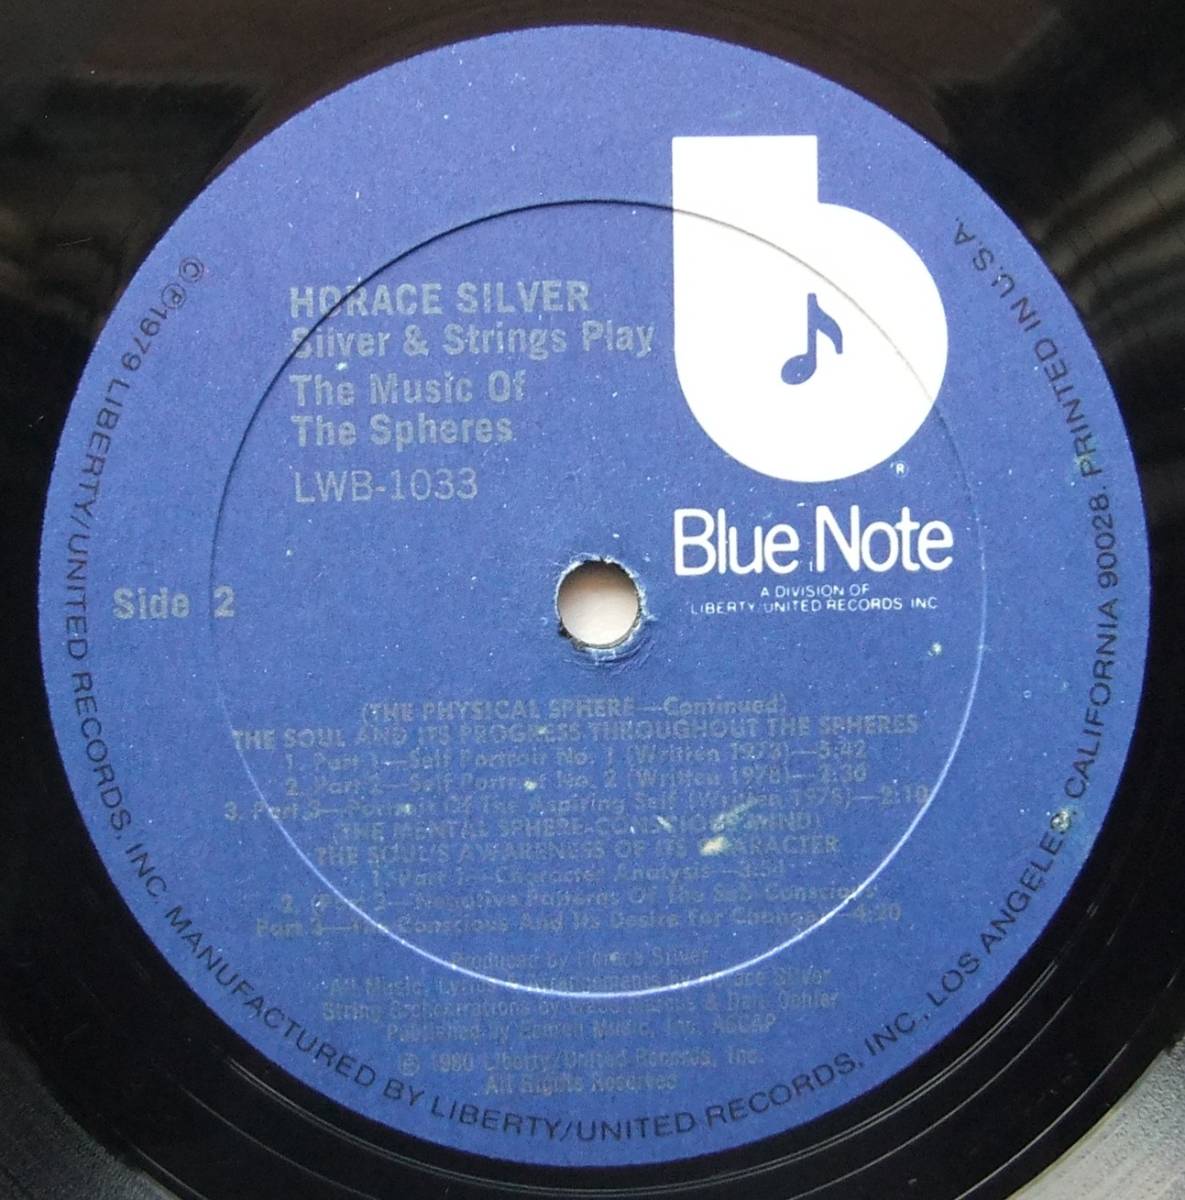 ◆ HORACE SILVER / Silver 'N Play The Music of the Spheres (2 LP) ◆ Blue Note LWB-1033 ◆ V_画像6